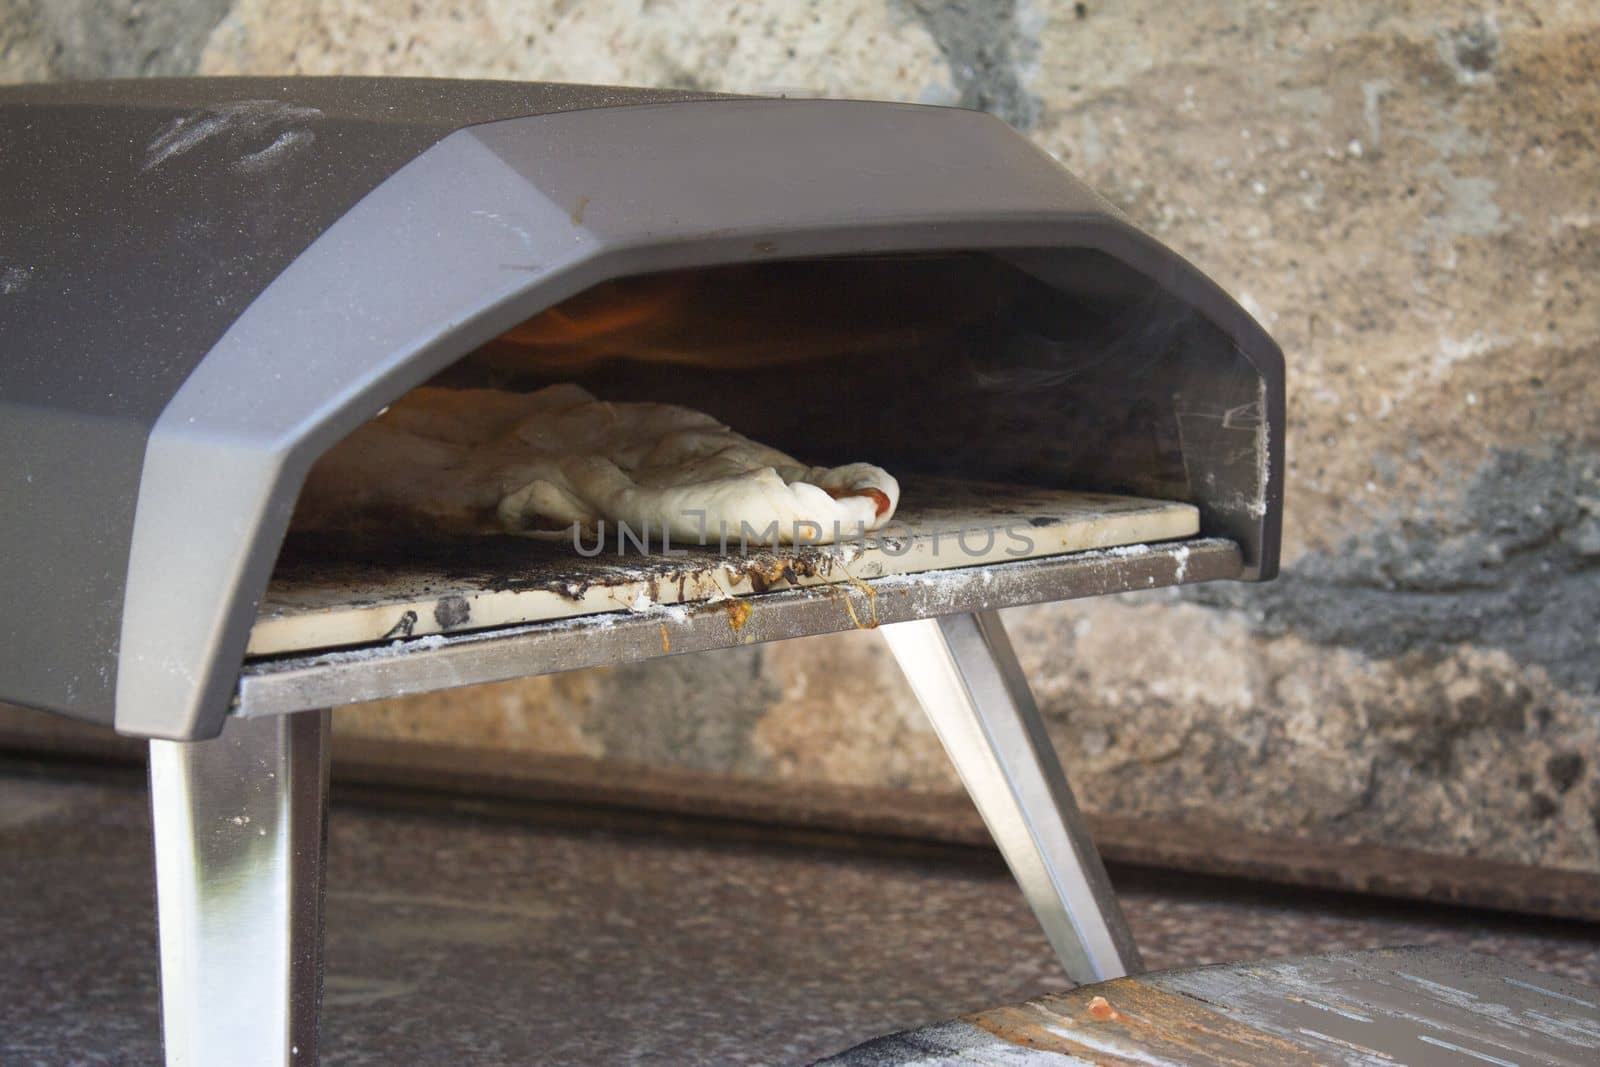 Small gas oven to make homemade pizzas by GemaIbarra